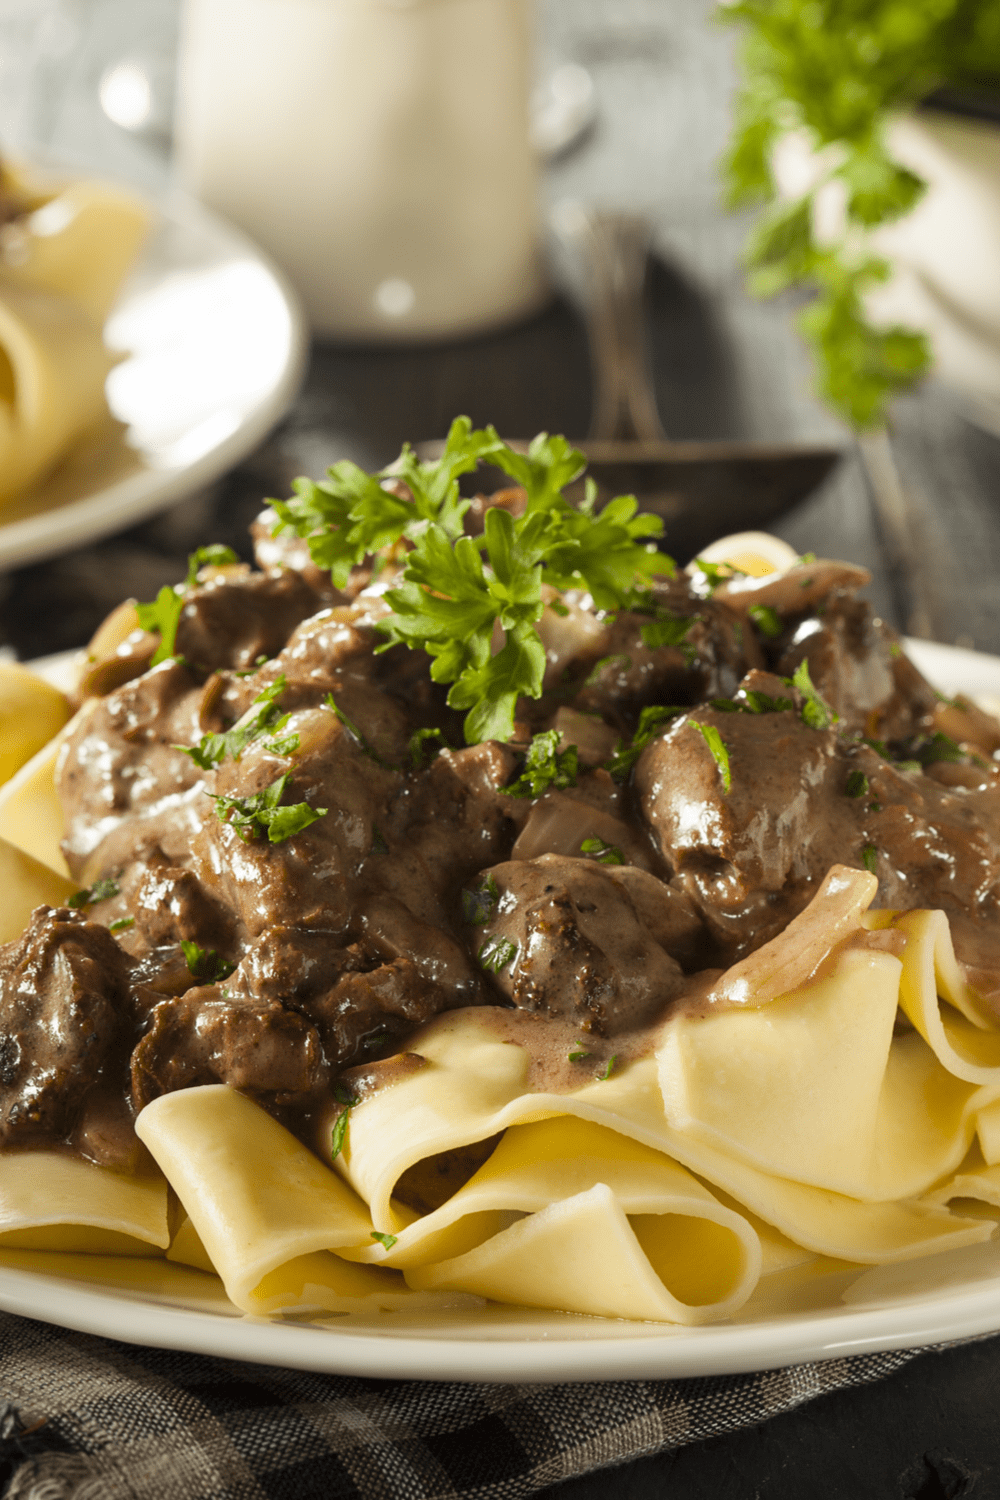 Beef stroganoff with mushrooms and noodles